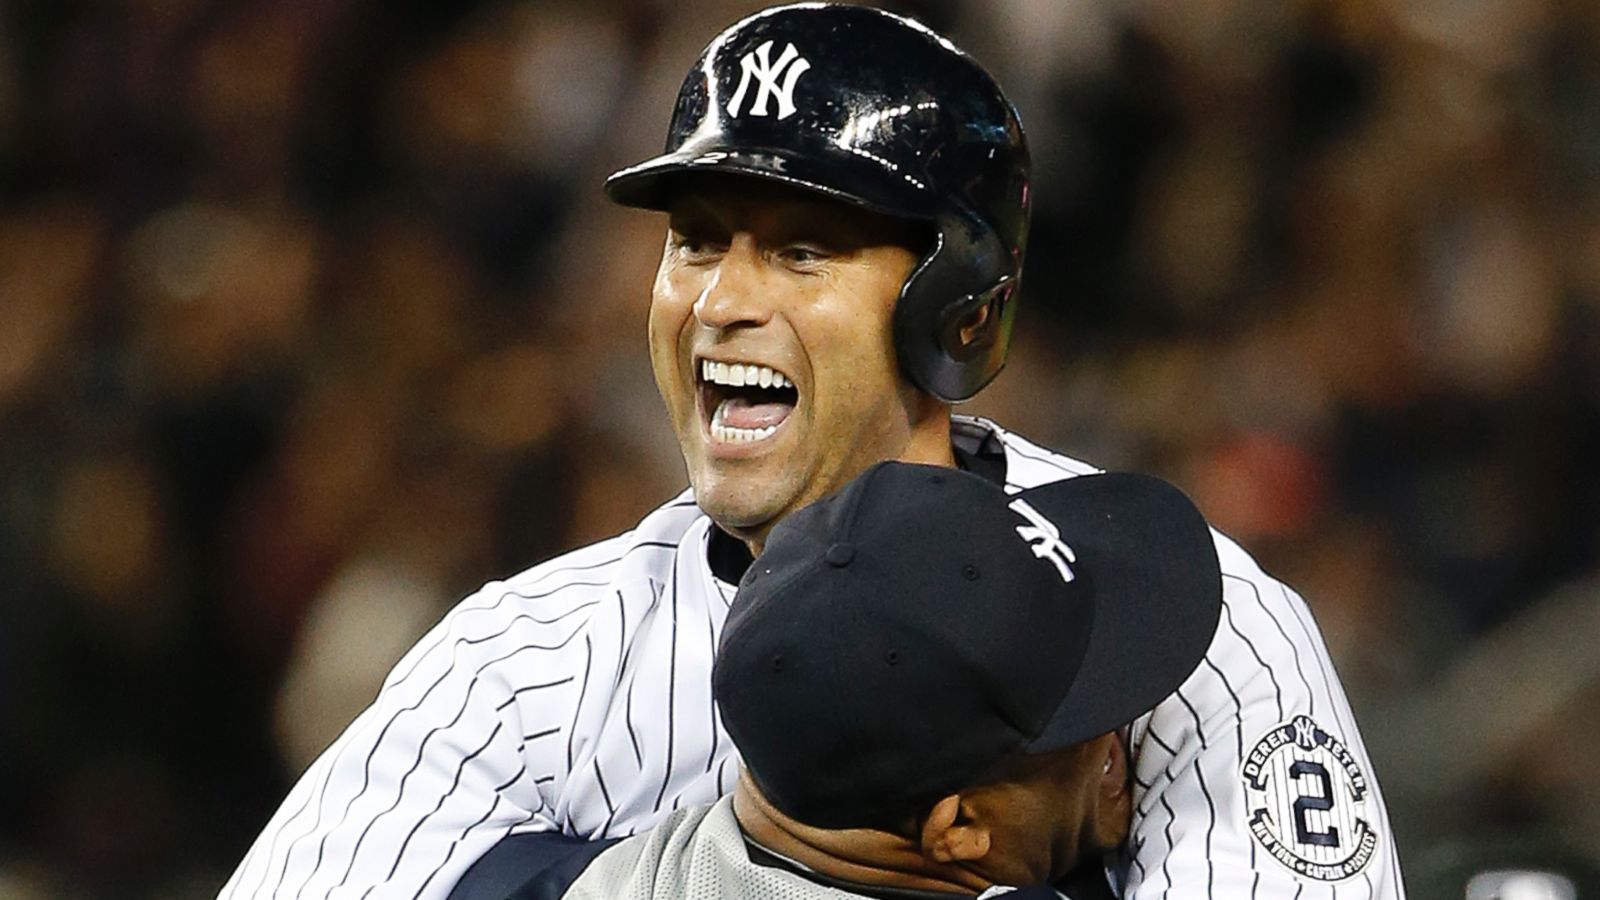 If He Had His Way, Derek Jeter Would Have Had the New York Yankees